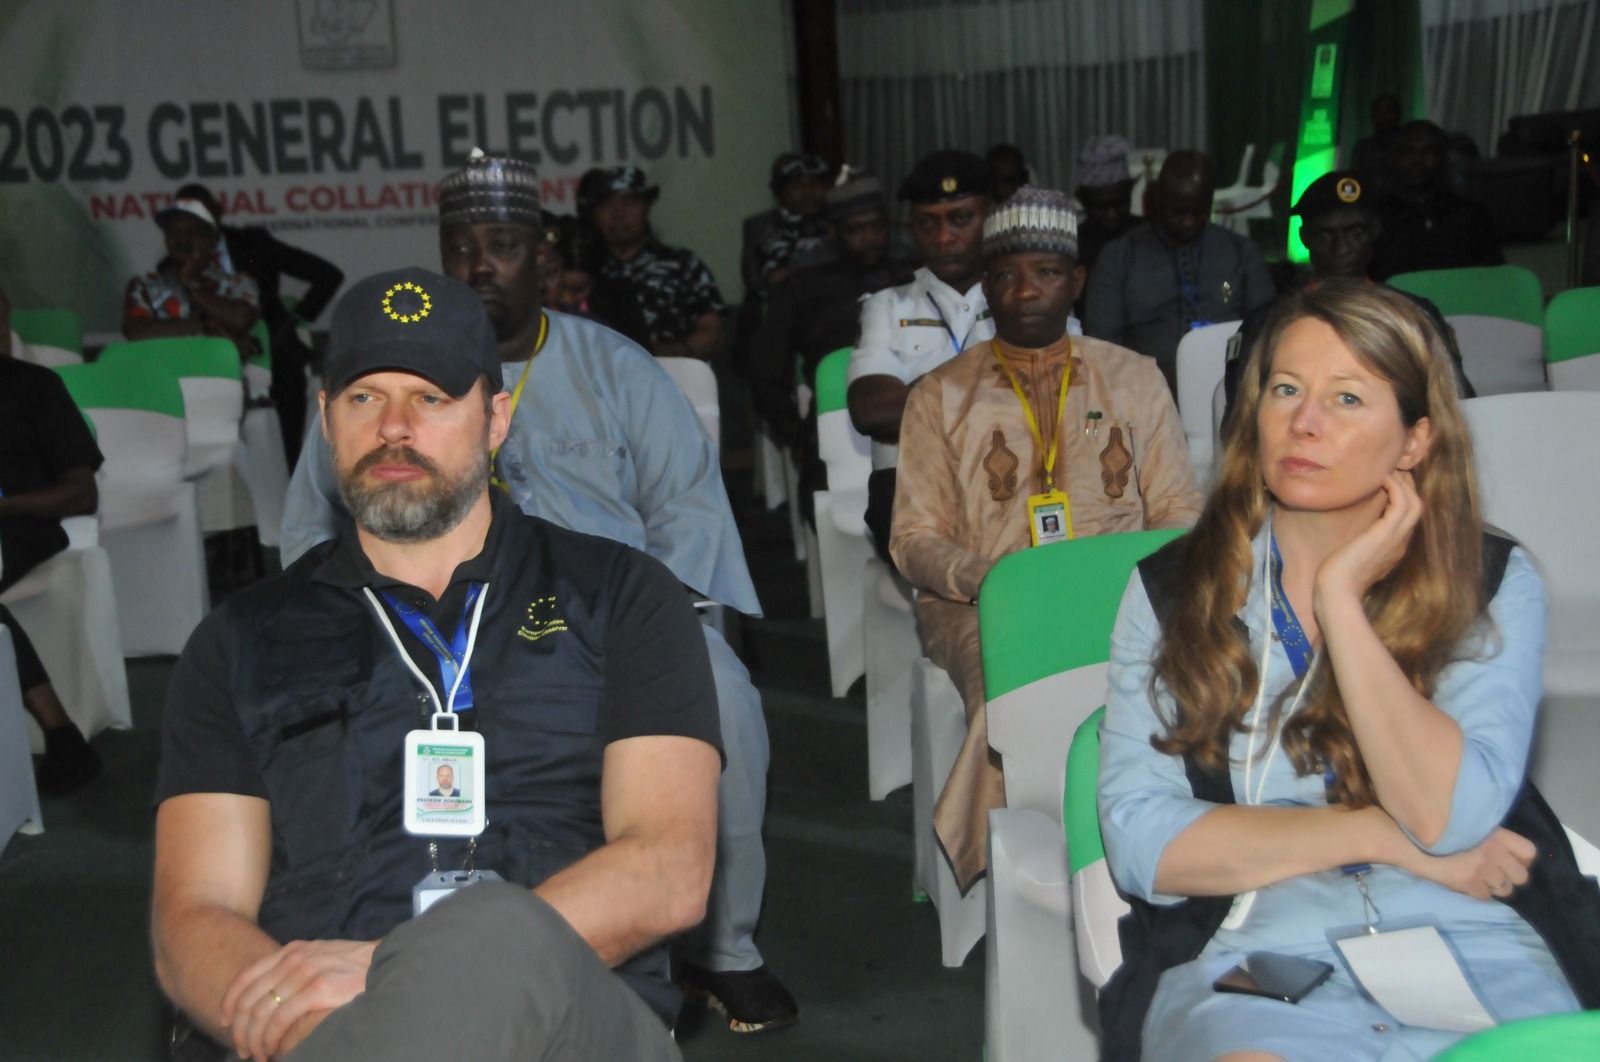 Nigeria: Chairman of INEC addresses official opening of presidential collation centre